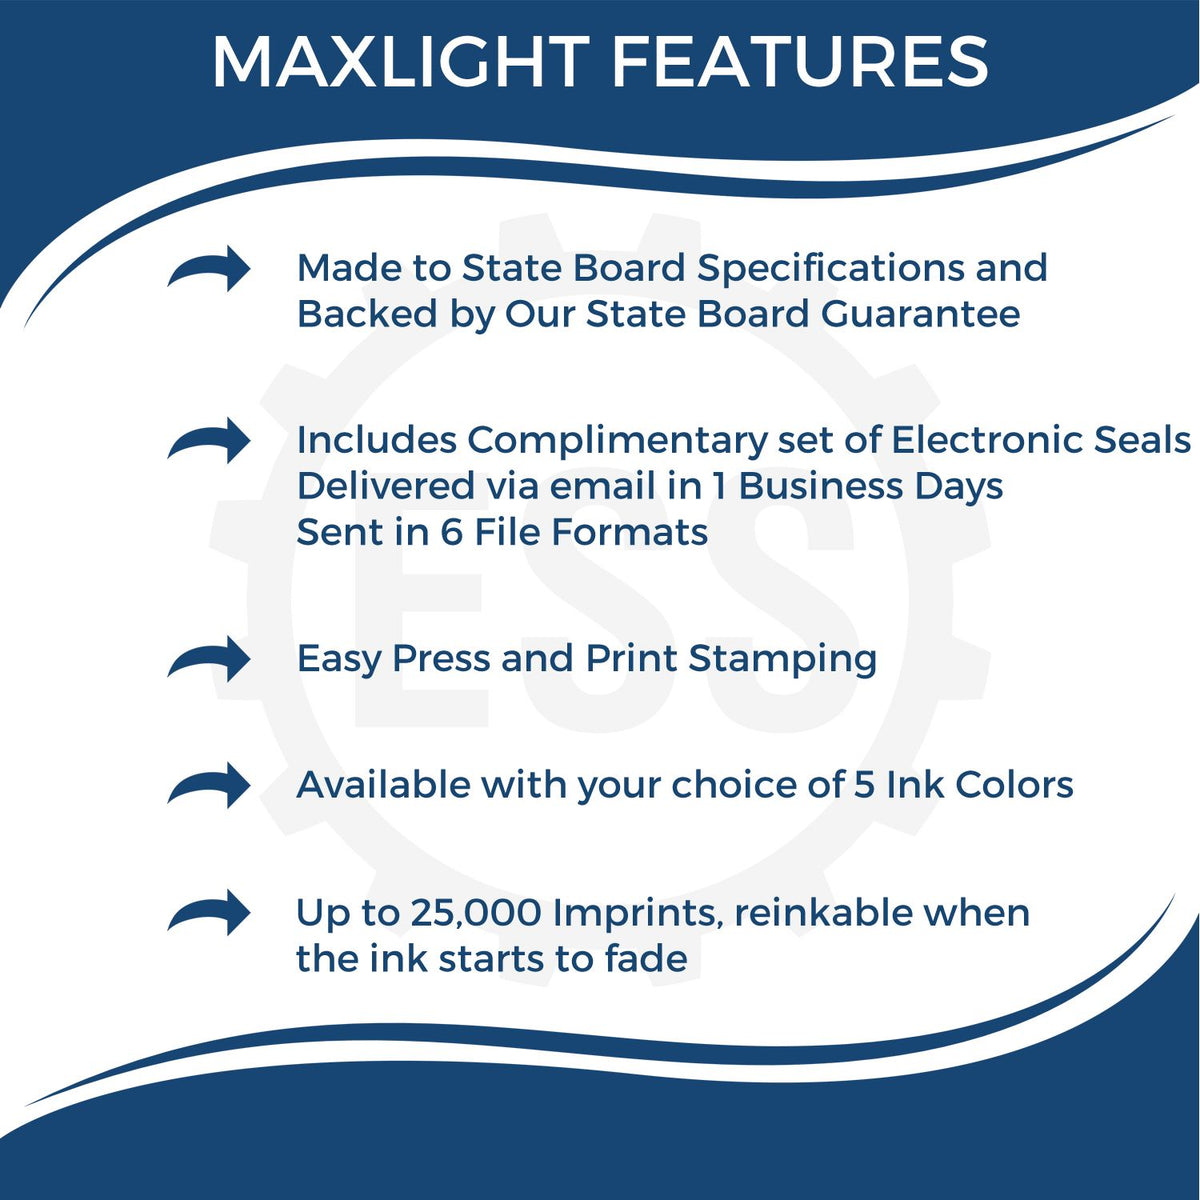 A picture of an infographic highlighting the selling points for the Premium MaxLight Pre-Inked Georgia Engineering Stamp